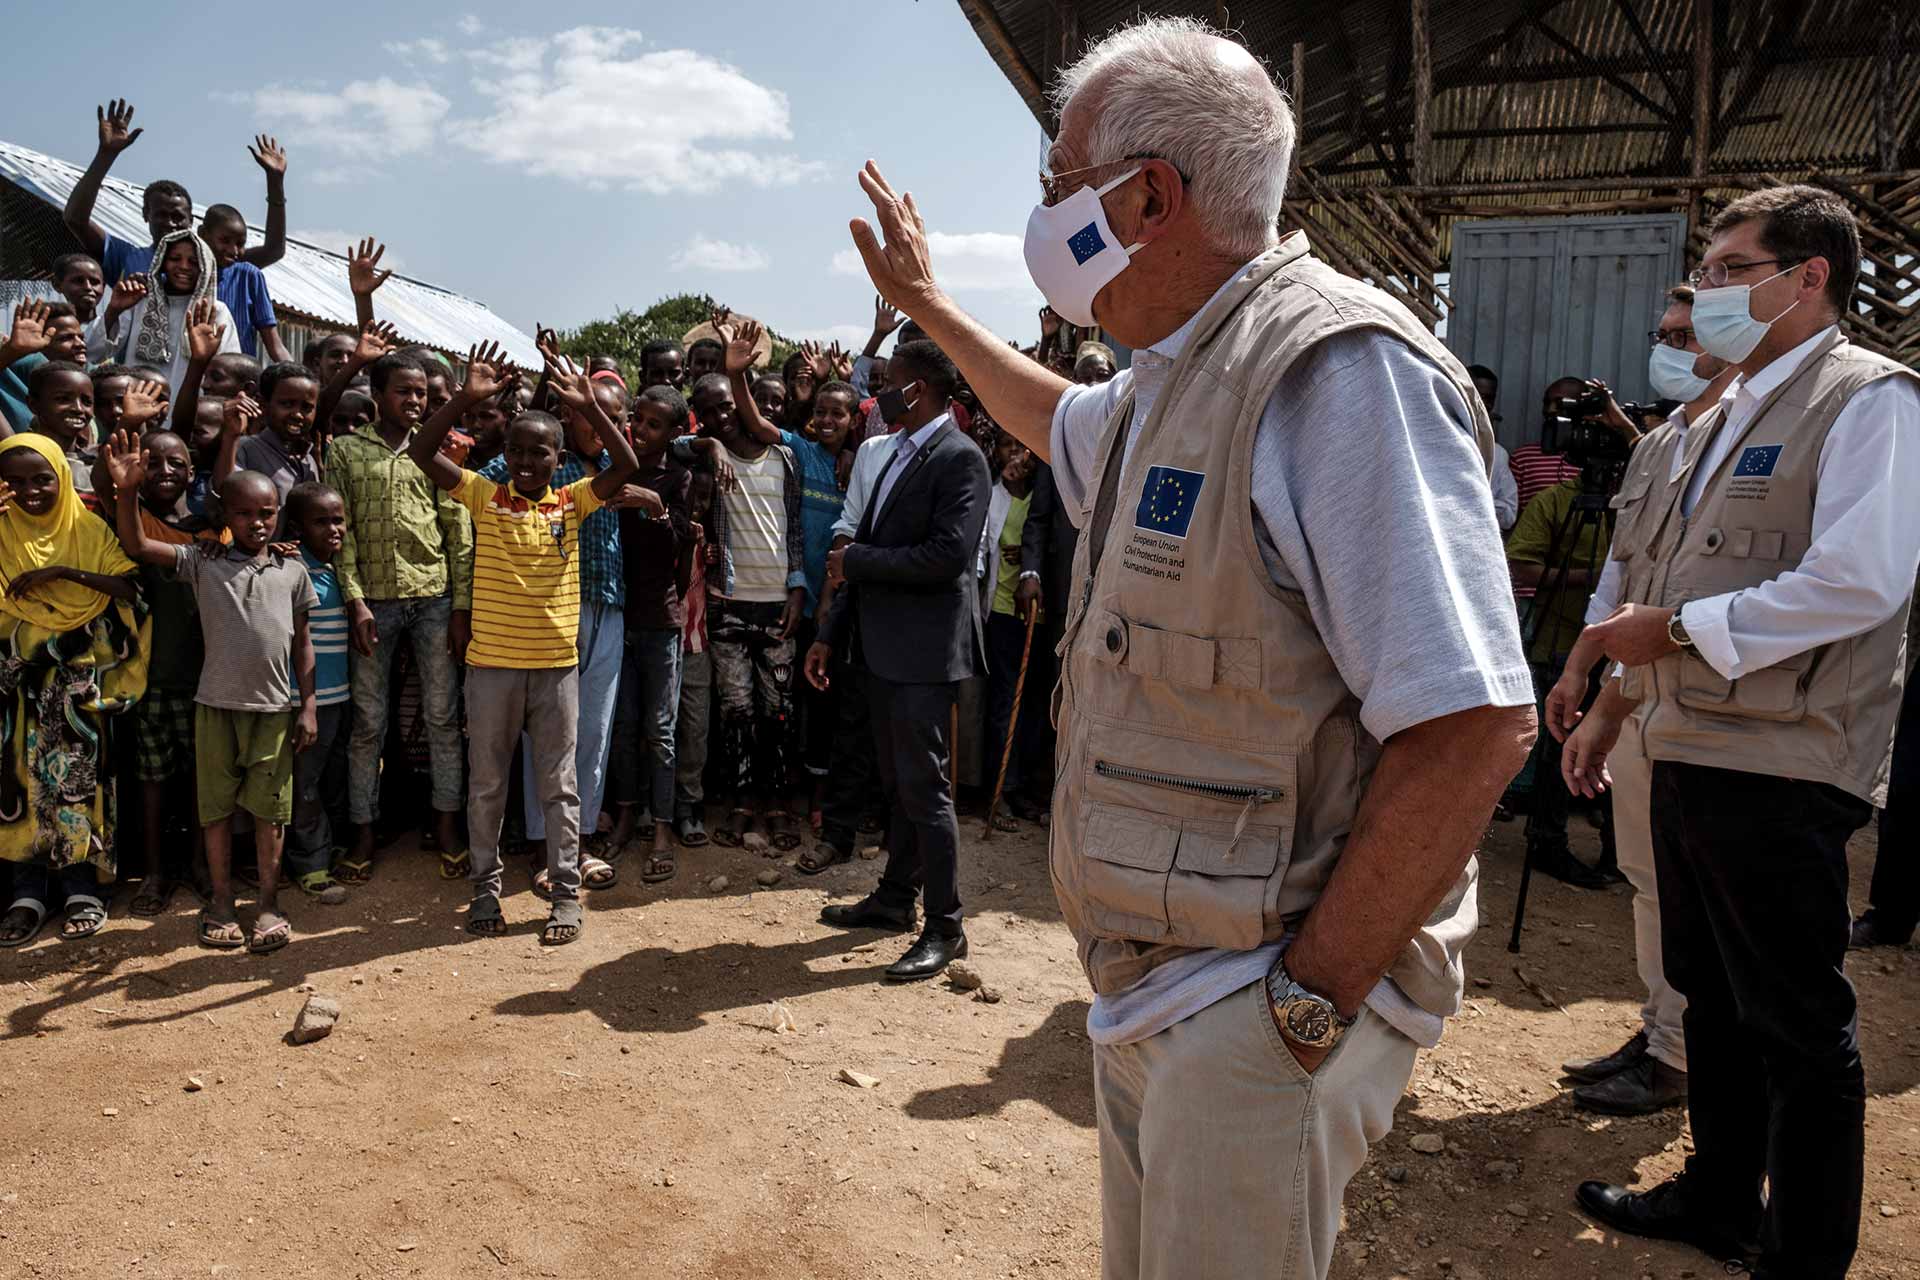 Africa: Josep Borrel, in the center, and Janez Lenarčič, on the right, greet the communities during a visit to the Qoloji Camp for Internally Displaced People, Ethiopia